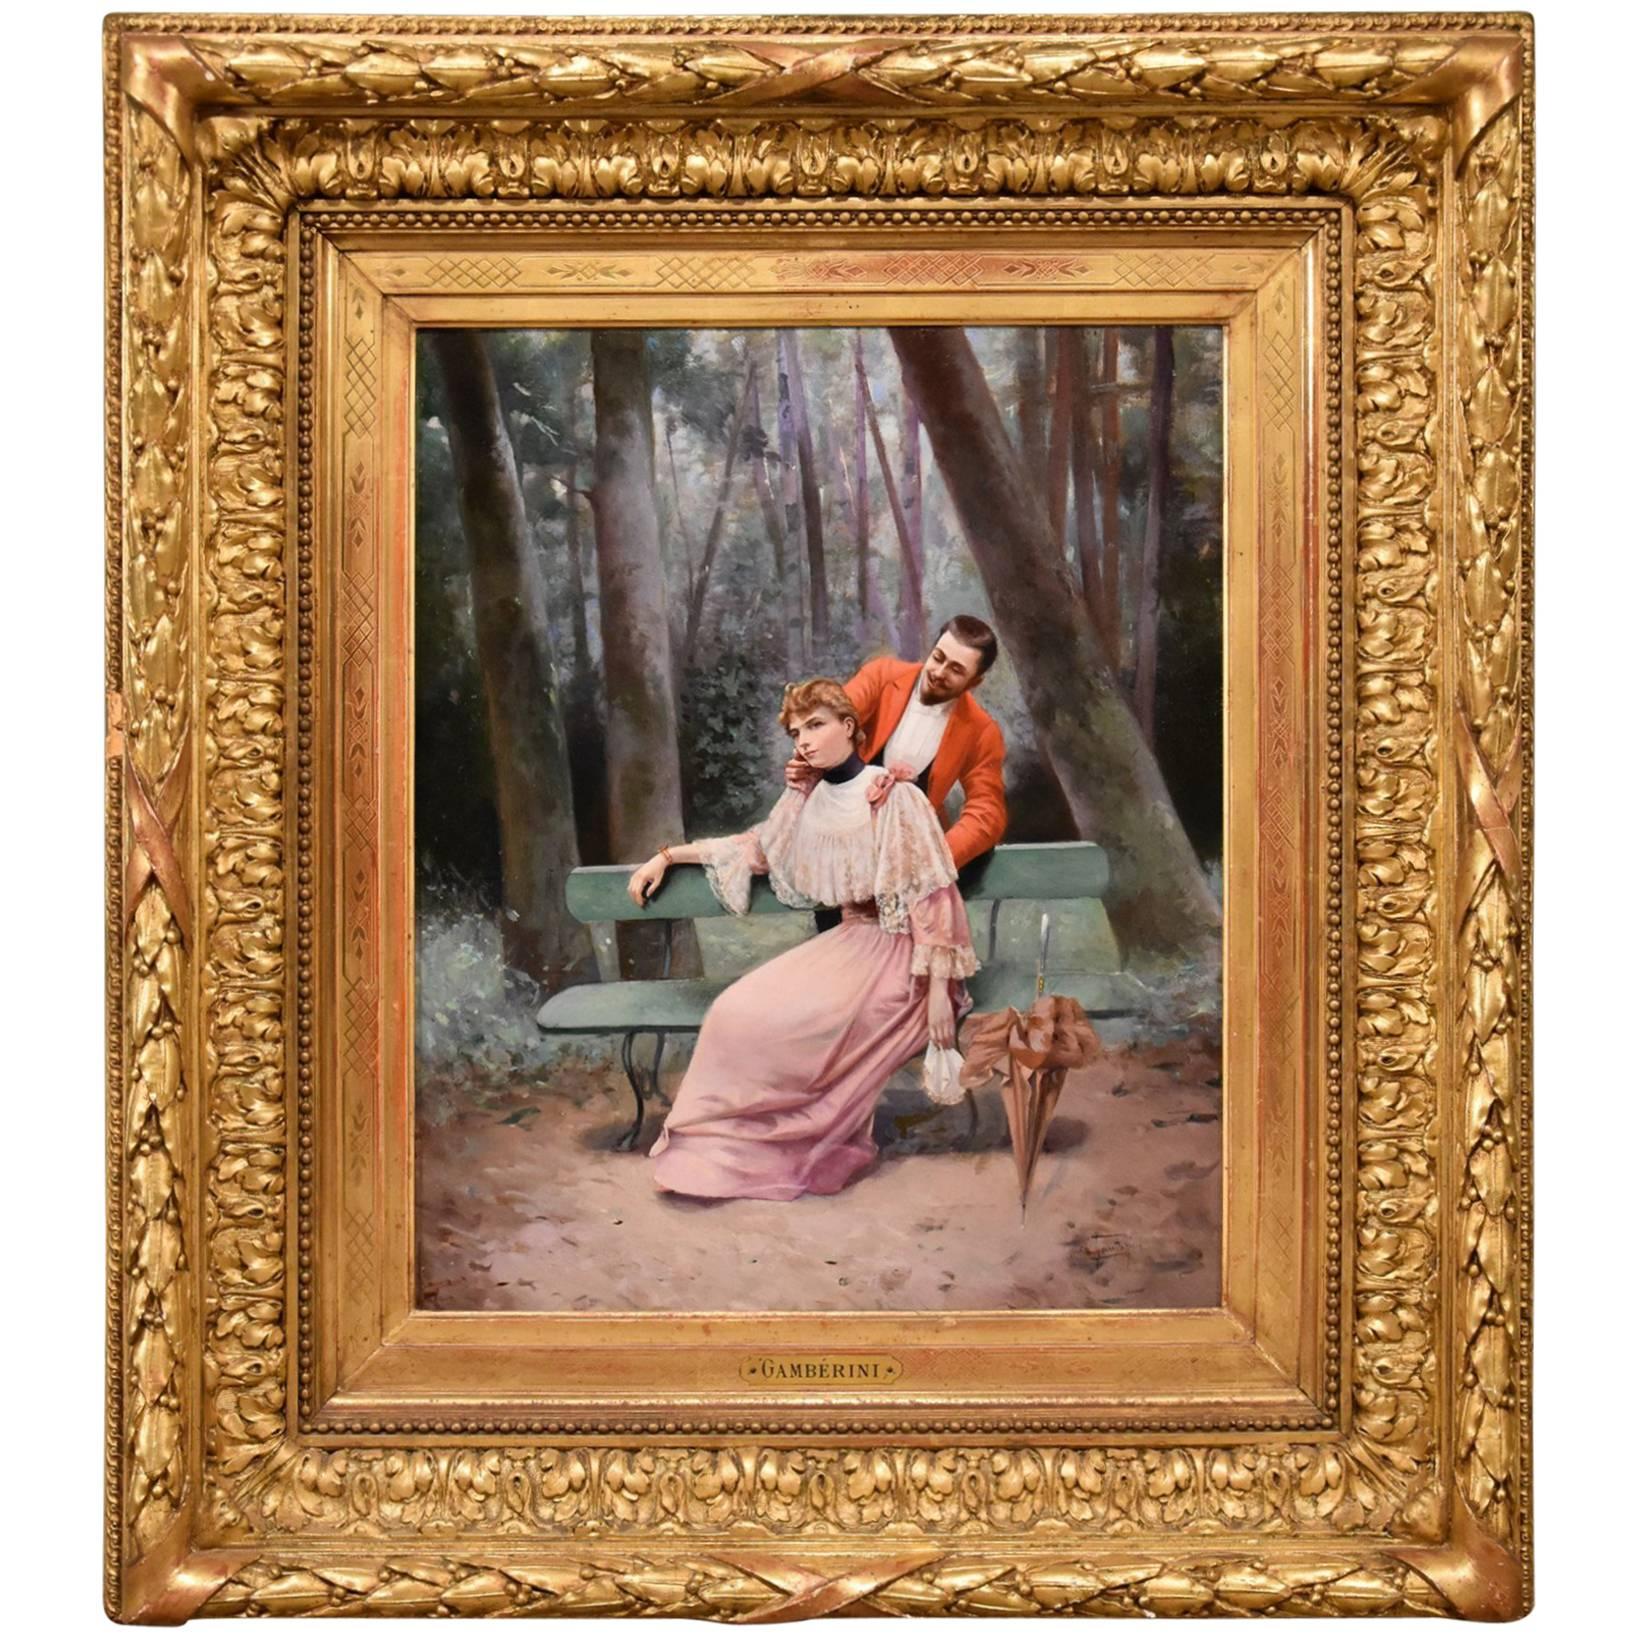 "An Elegant Courtship" Painting by Giovacchino Gamberini For Sale